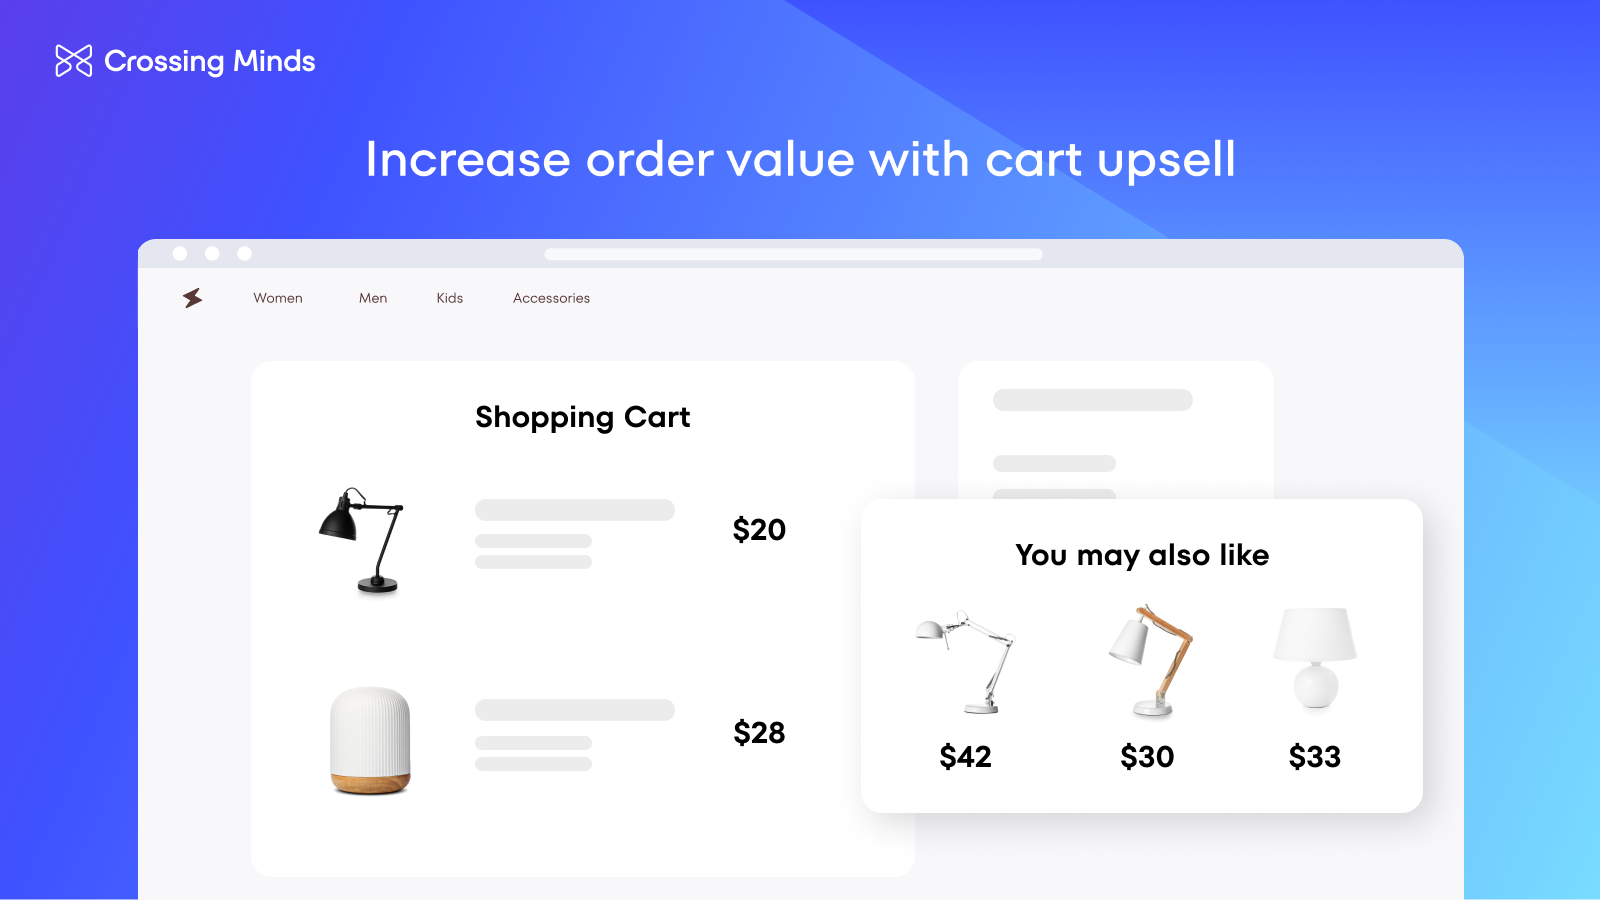 Increase order value with cart upsell